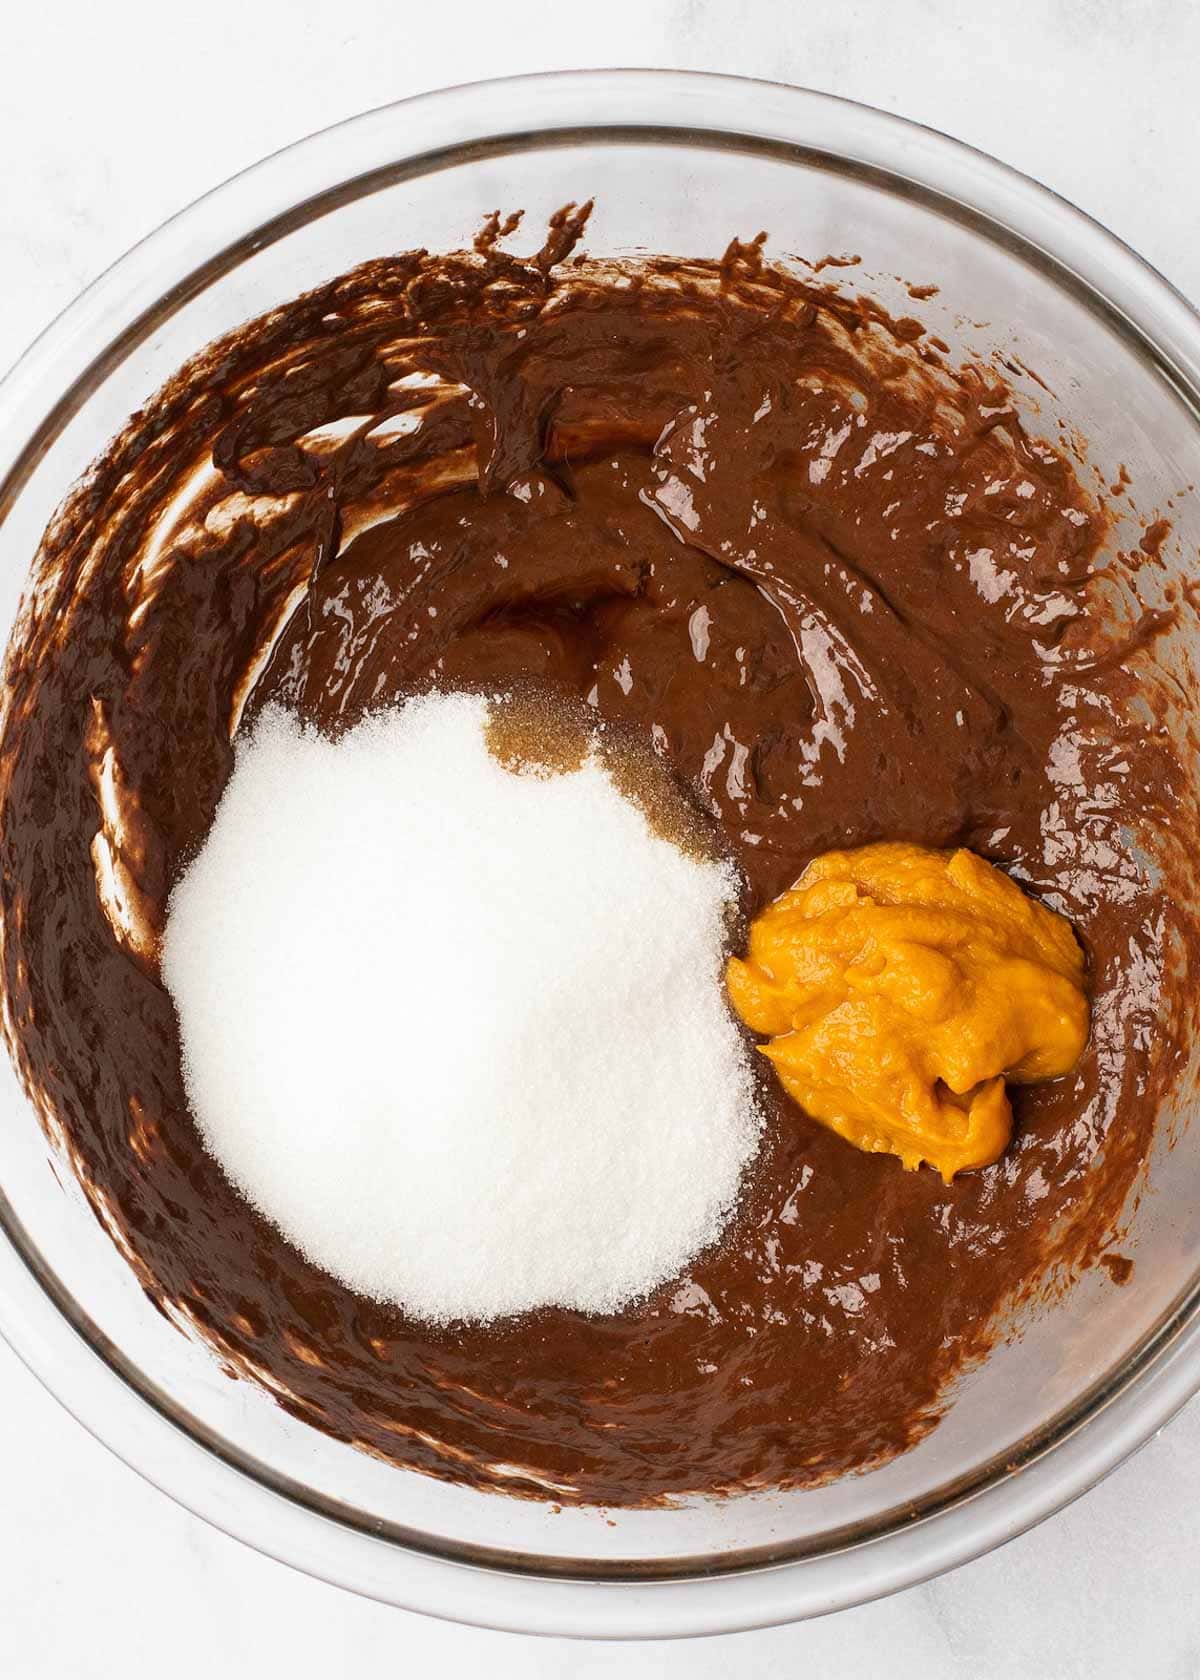 Overhead view of pumpkin puree, monkfruit sweeter, and vanilla extract on top of a chocolate batter in a mixing bowl